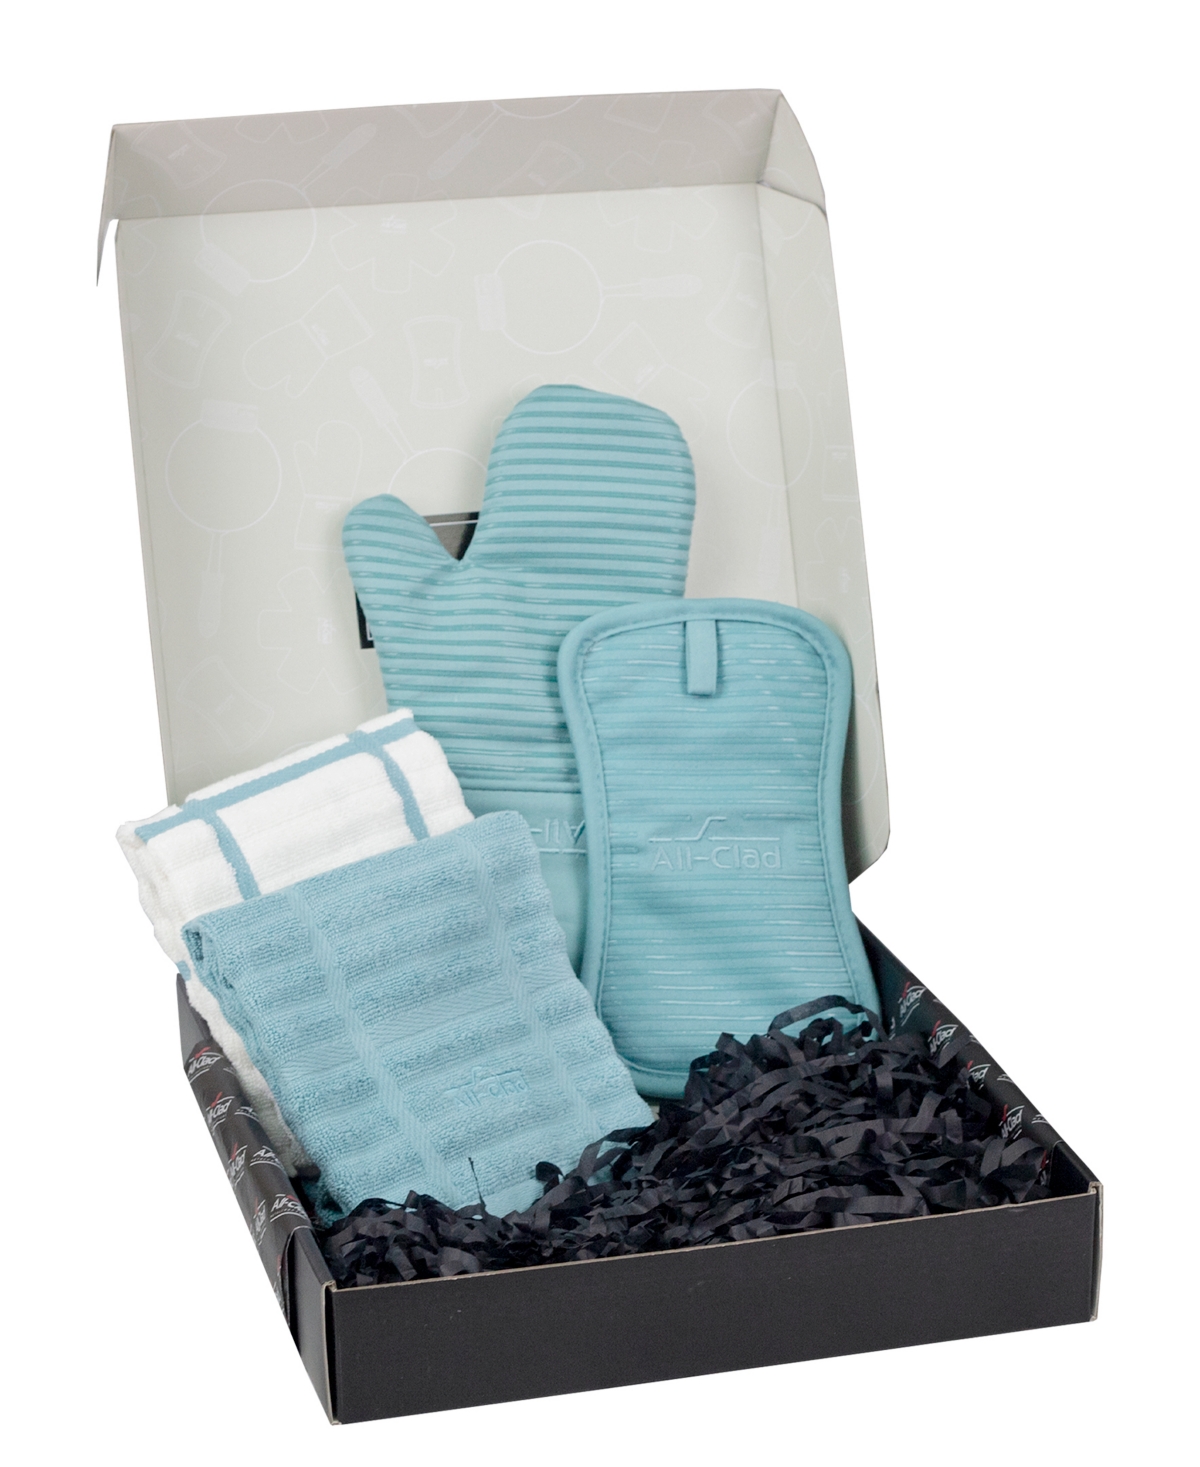 All-clad Foundation Collection 4-piece Gift Set In Rainfall